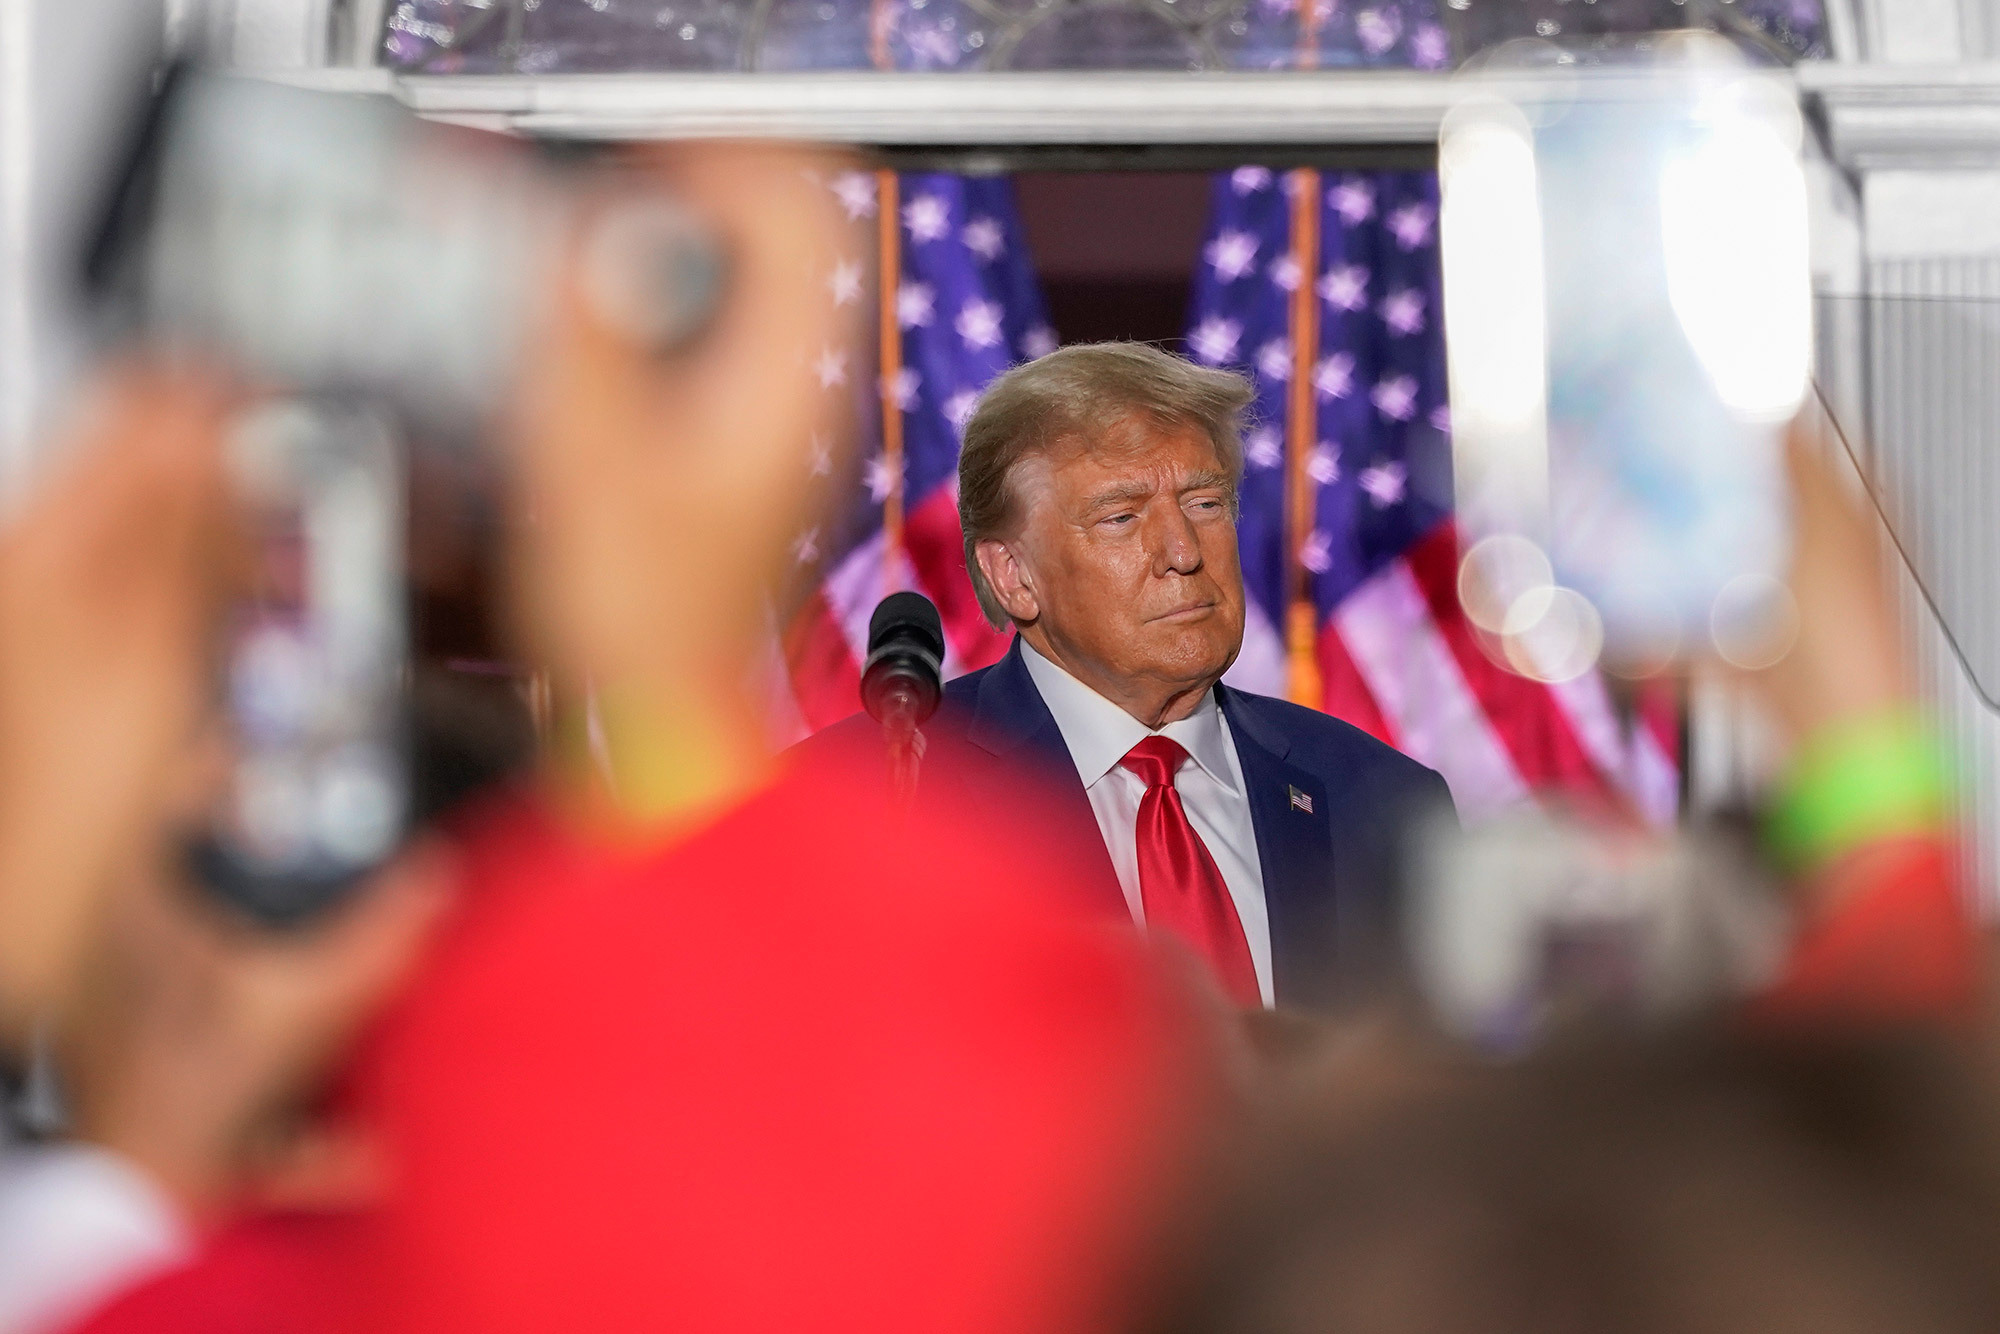 Trump speaks to supporters at his resort in Bedminster, New Jersey, on June 13, 2023. "This is called election interference and yet another attempt to rig and steal a presidential election," he said after slamming the administration of President Joe Biden. 